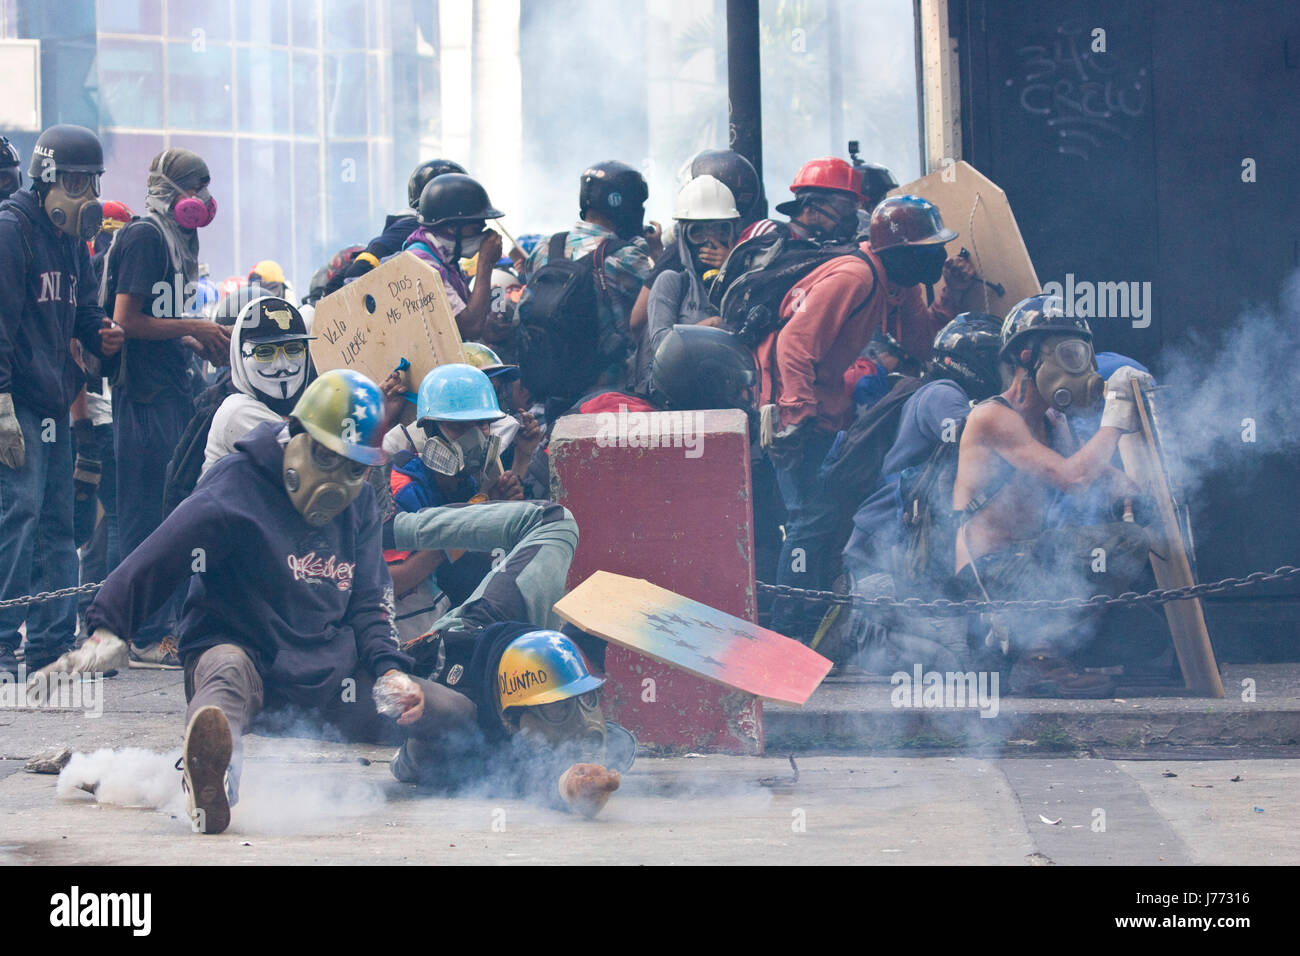 Demonstrators tries to catch a tear gas canister fired by the police during a protest against the government of Nicolas Maduro in Caracas. Stock Photo